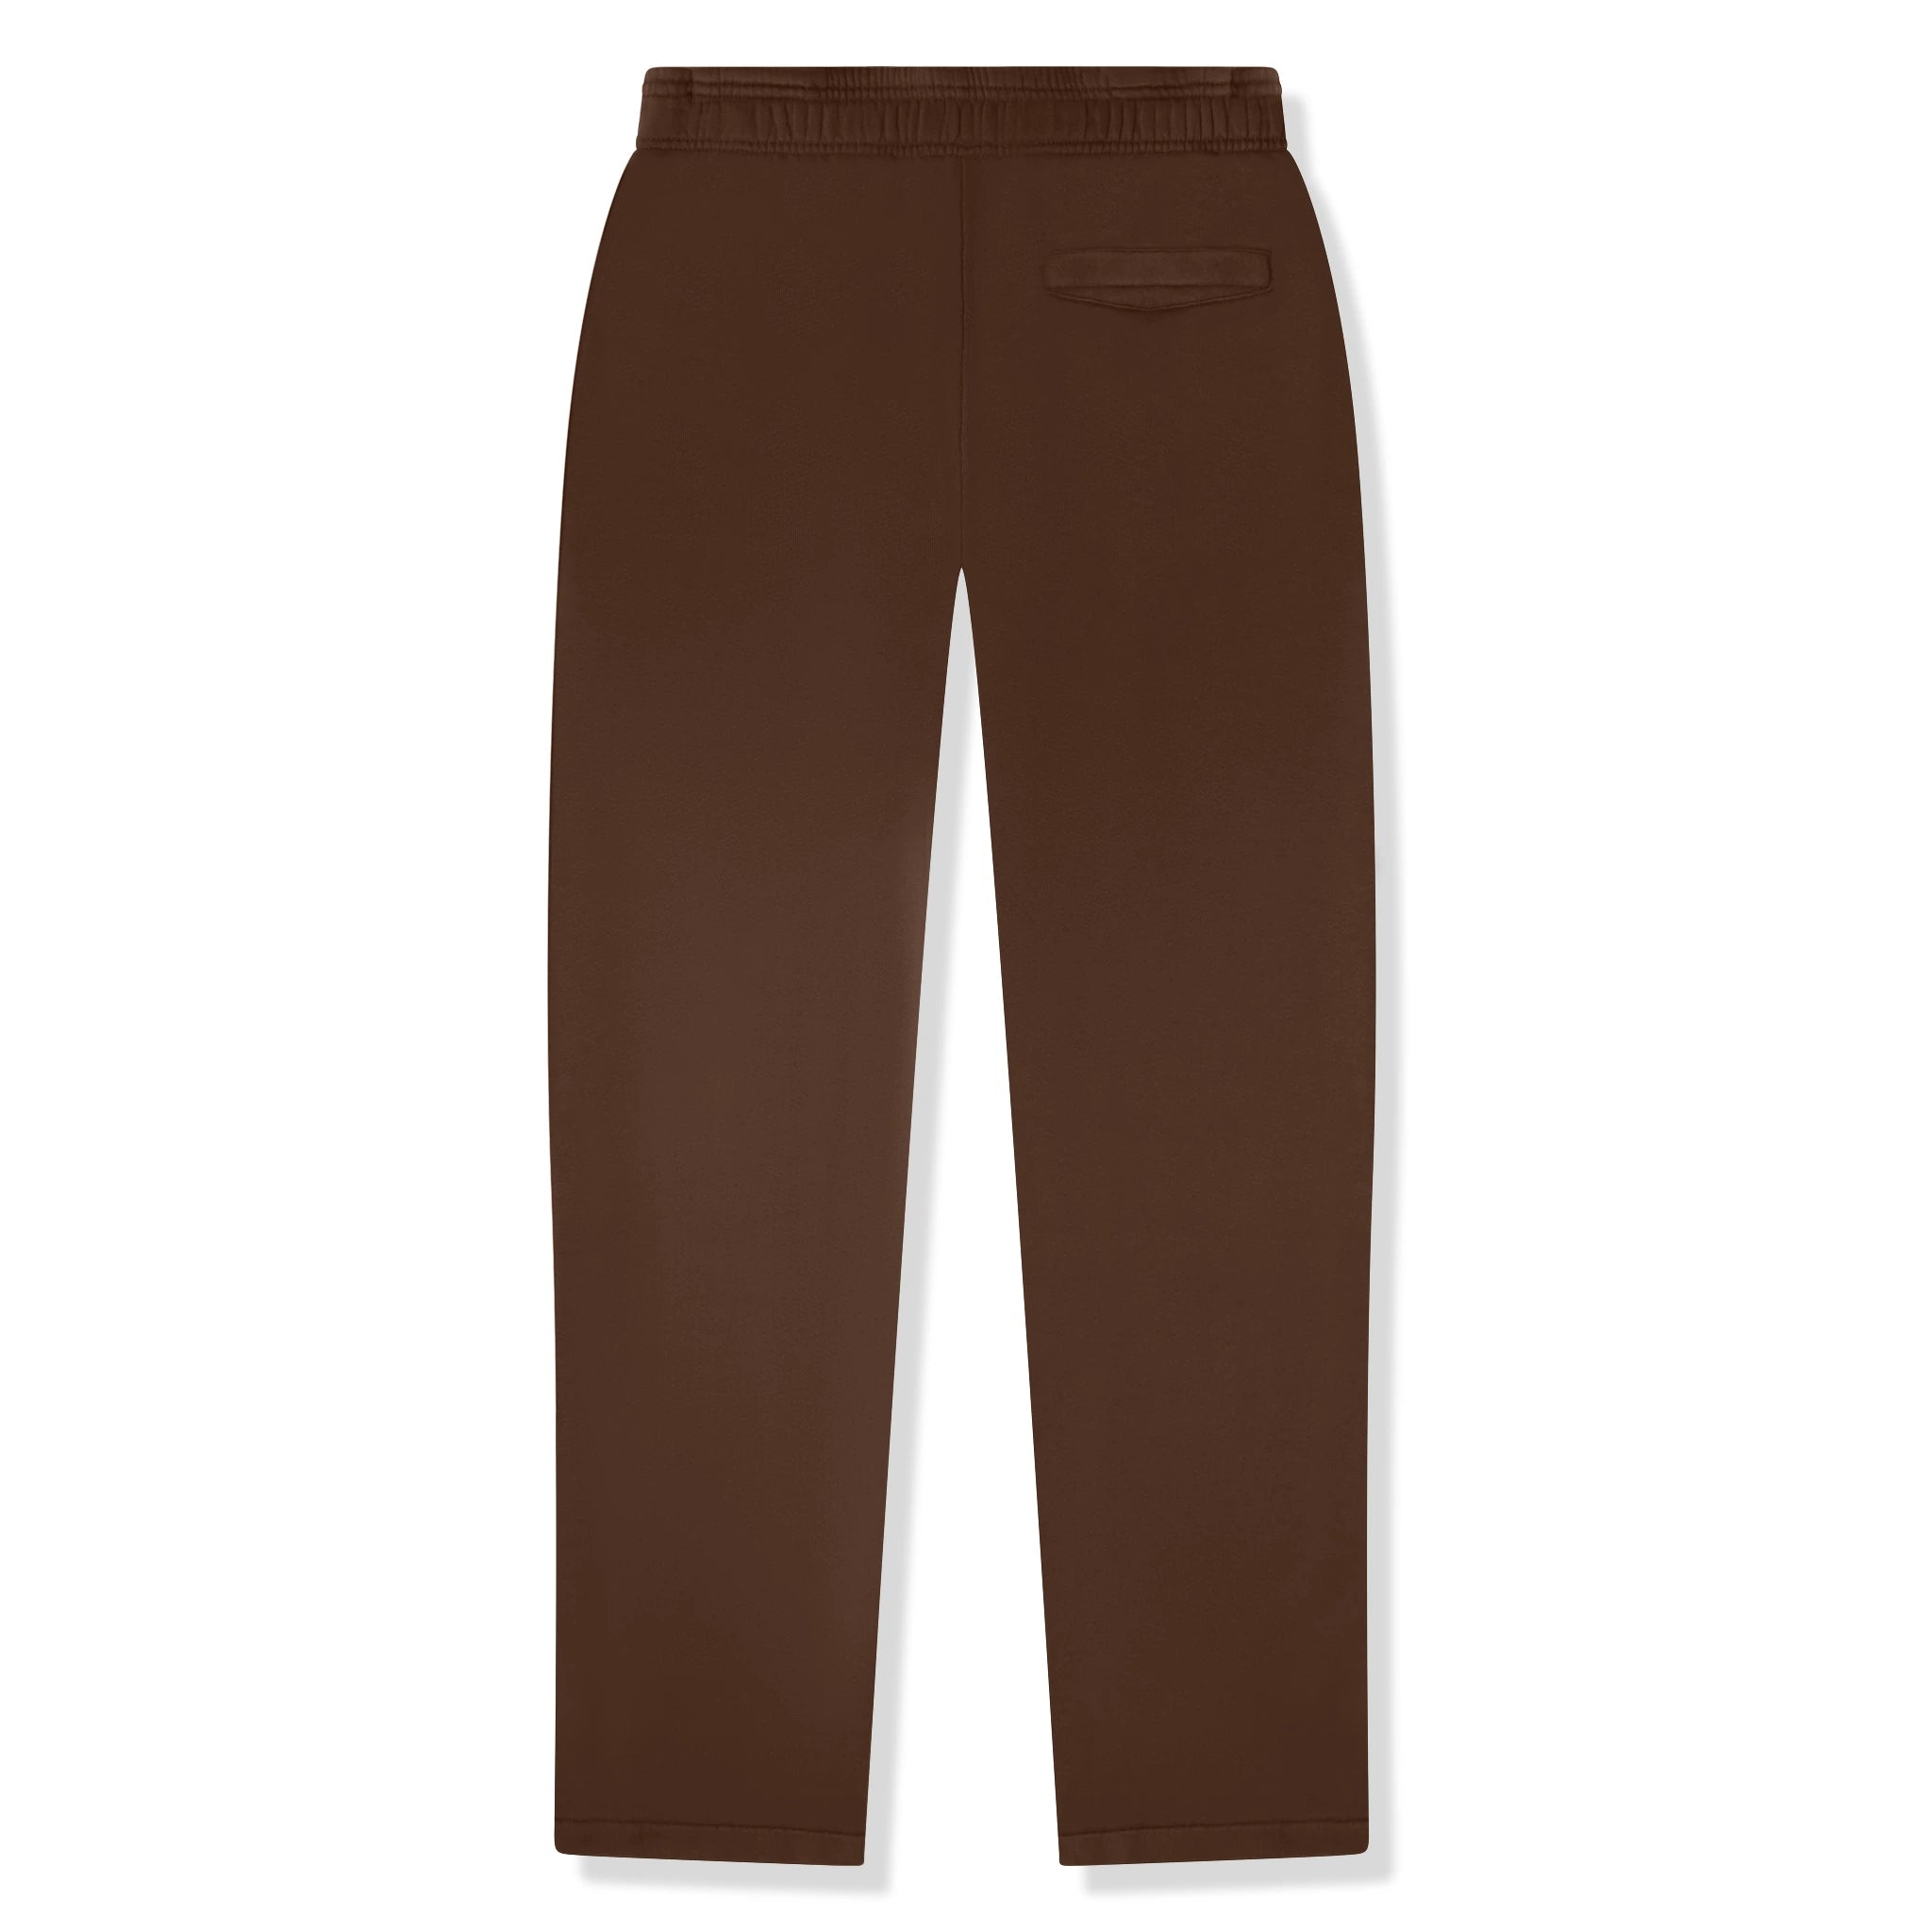 Back view of Eric Emanuel EE Basic Brown White Sweatpants